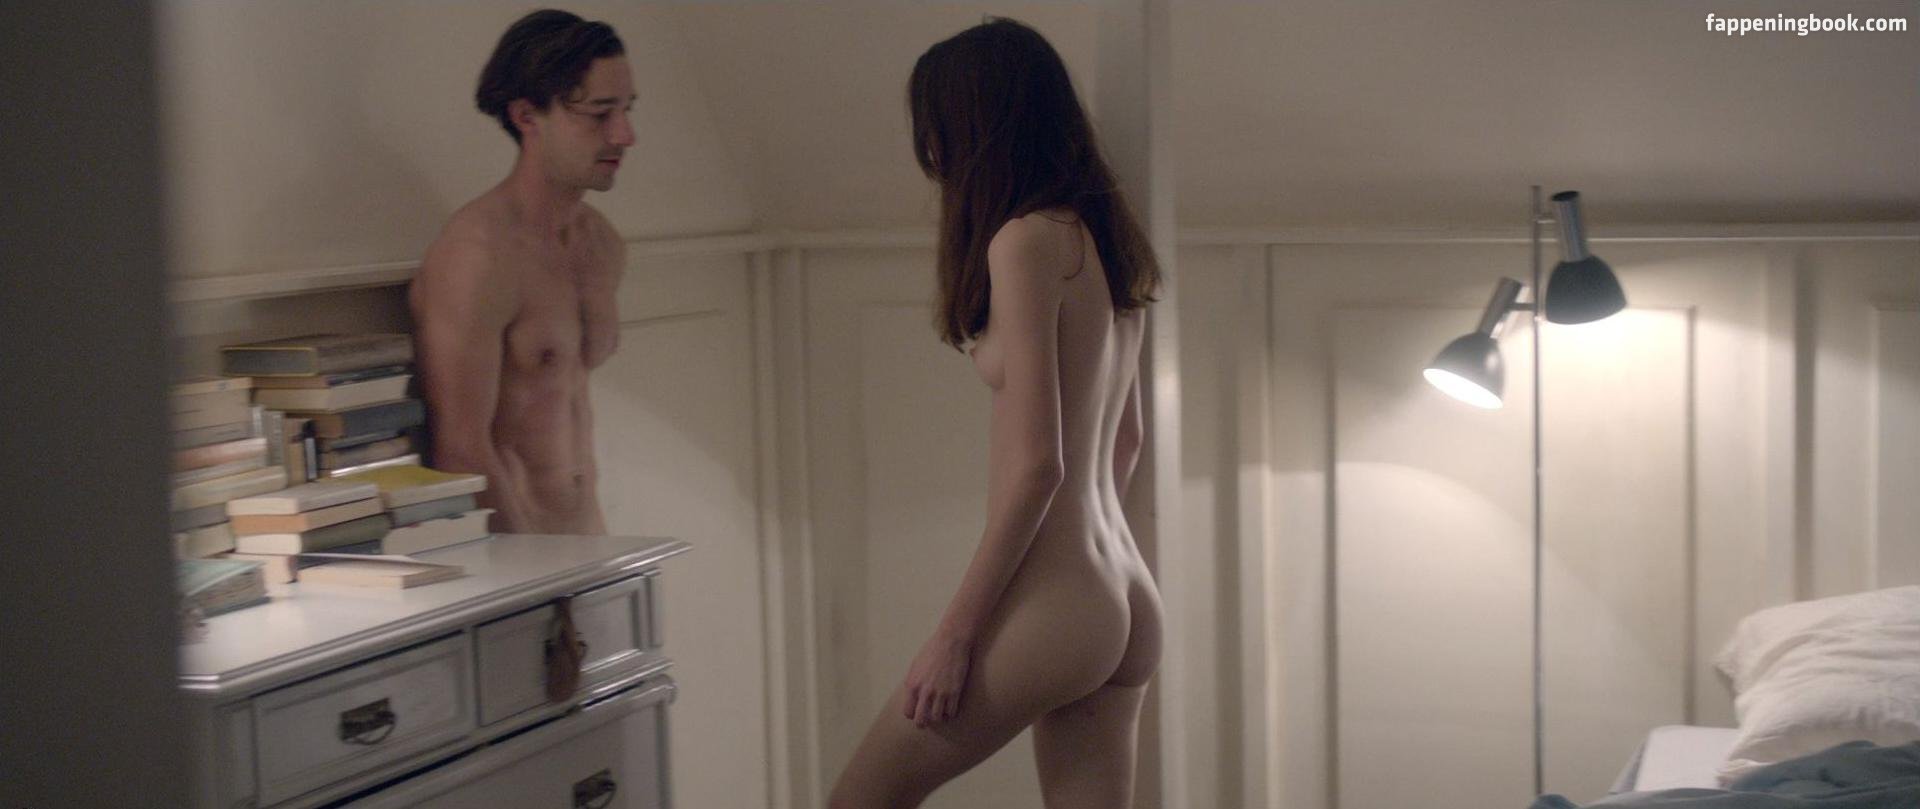 Stacy Martin Nude, The Fappening - Photo #507073 - FappeningBook.